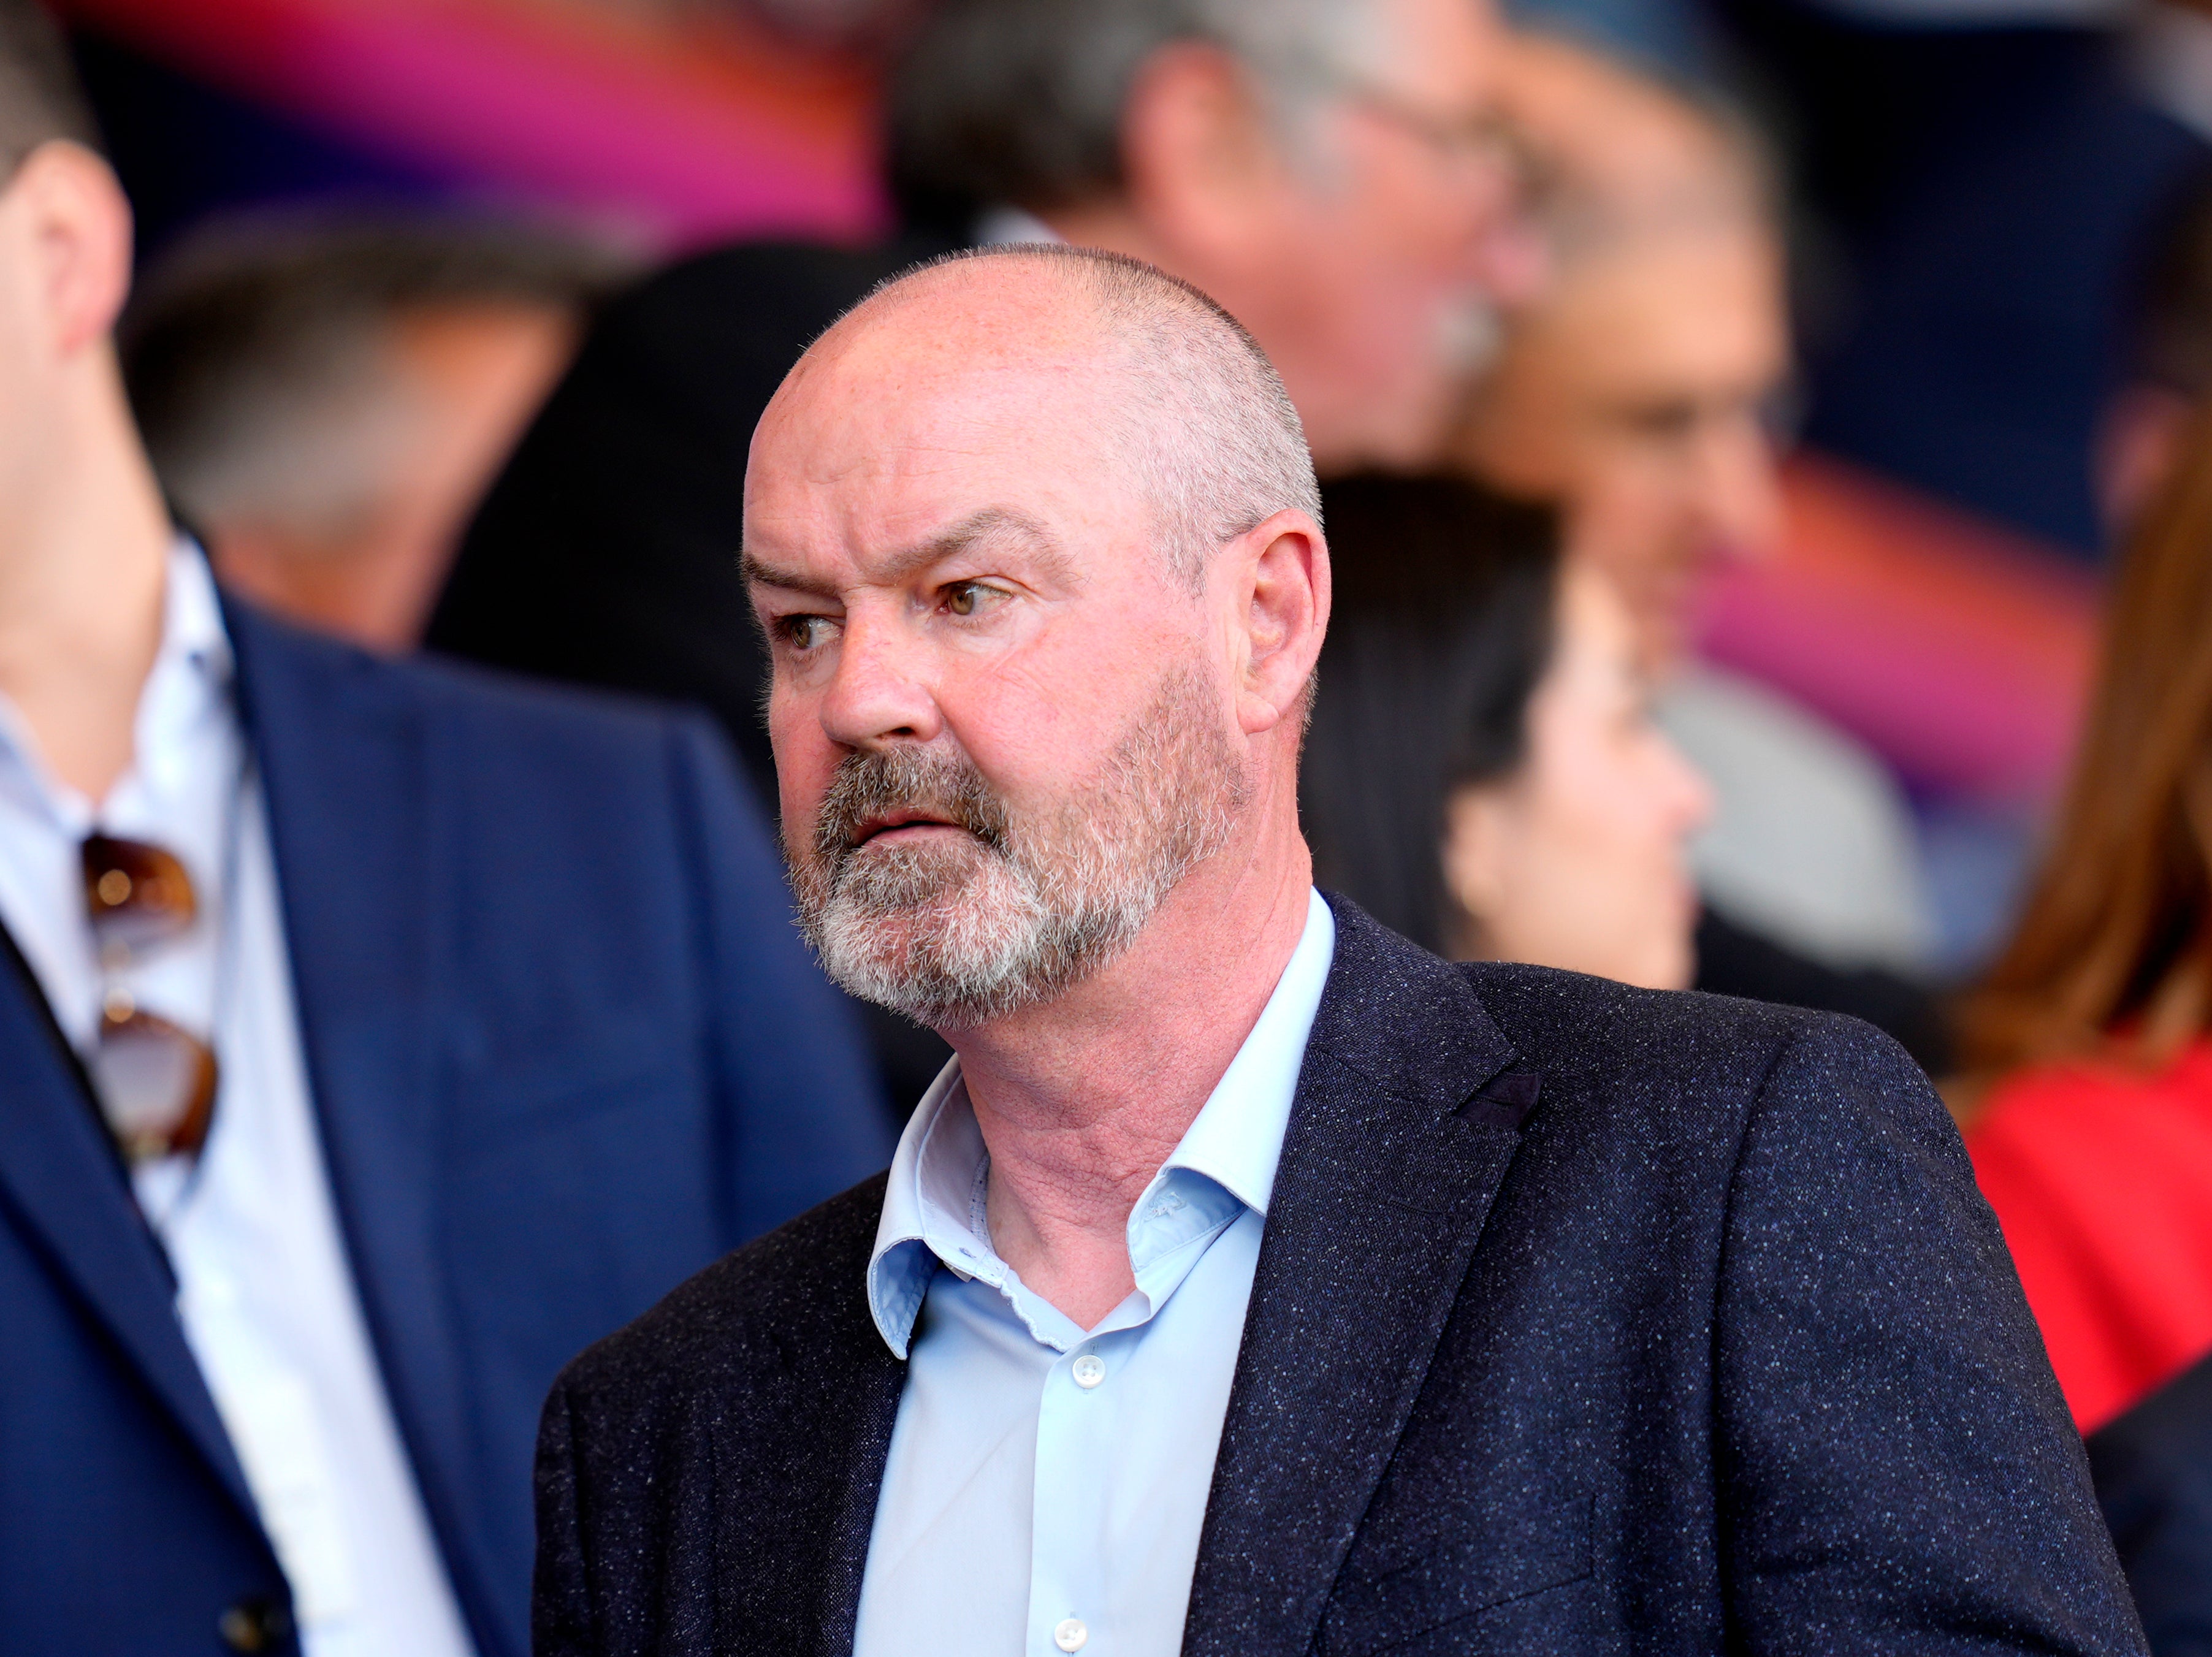 Scotland manager Steve Clarke in the stands at the Vitality Stadium for Bournemouth v Brentford